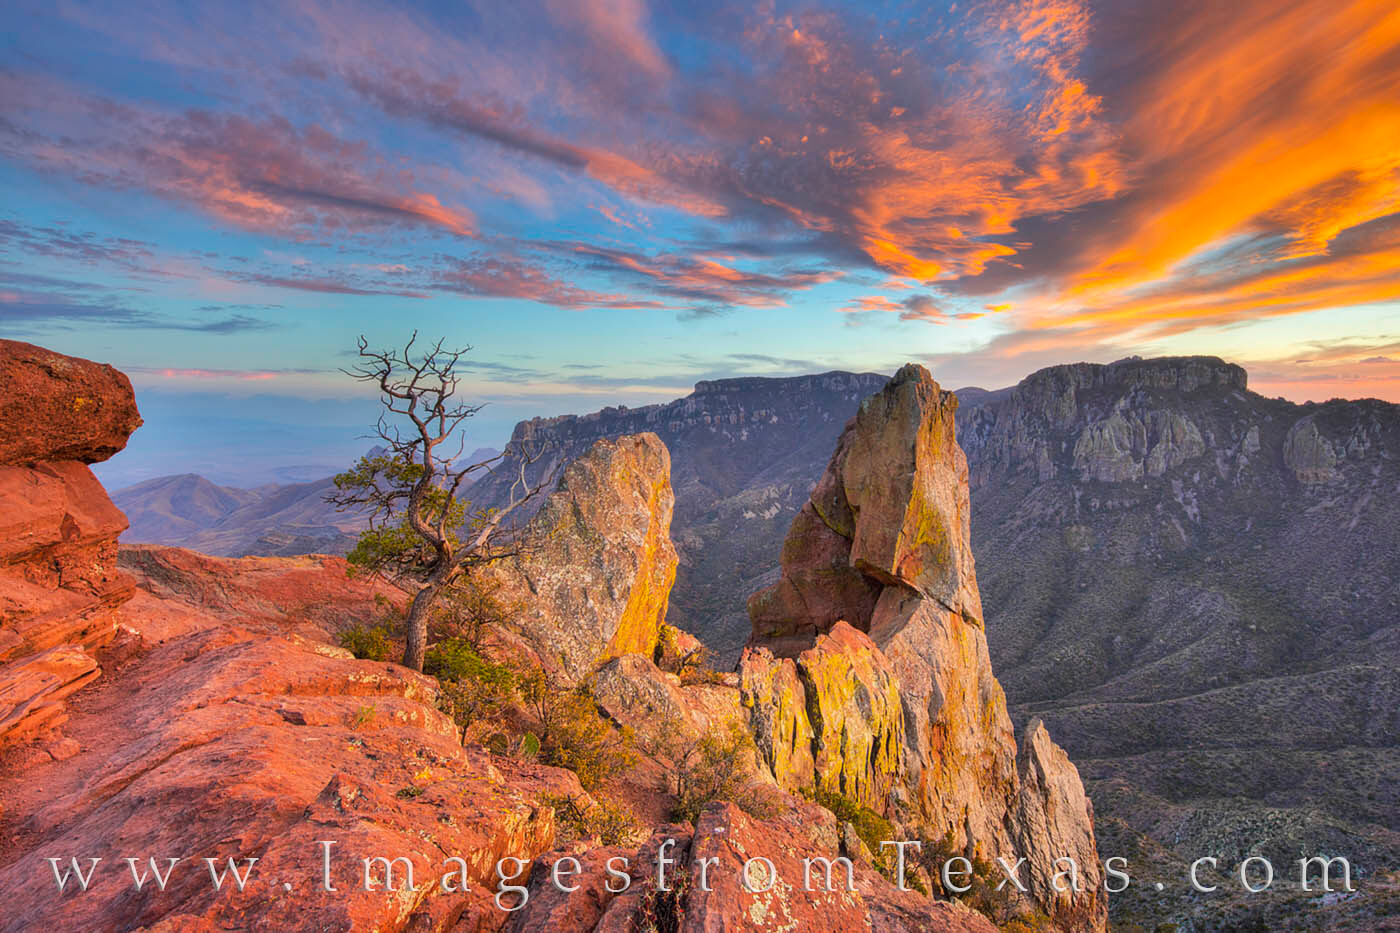 big bend national park,chisos mountains,lost mine trail,lost mine hike,big bend prints,big bend photography,hiking big bend,chisos mountains images,texas landscapes,texas images